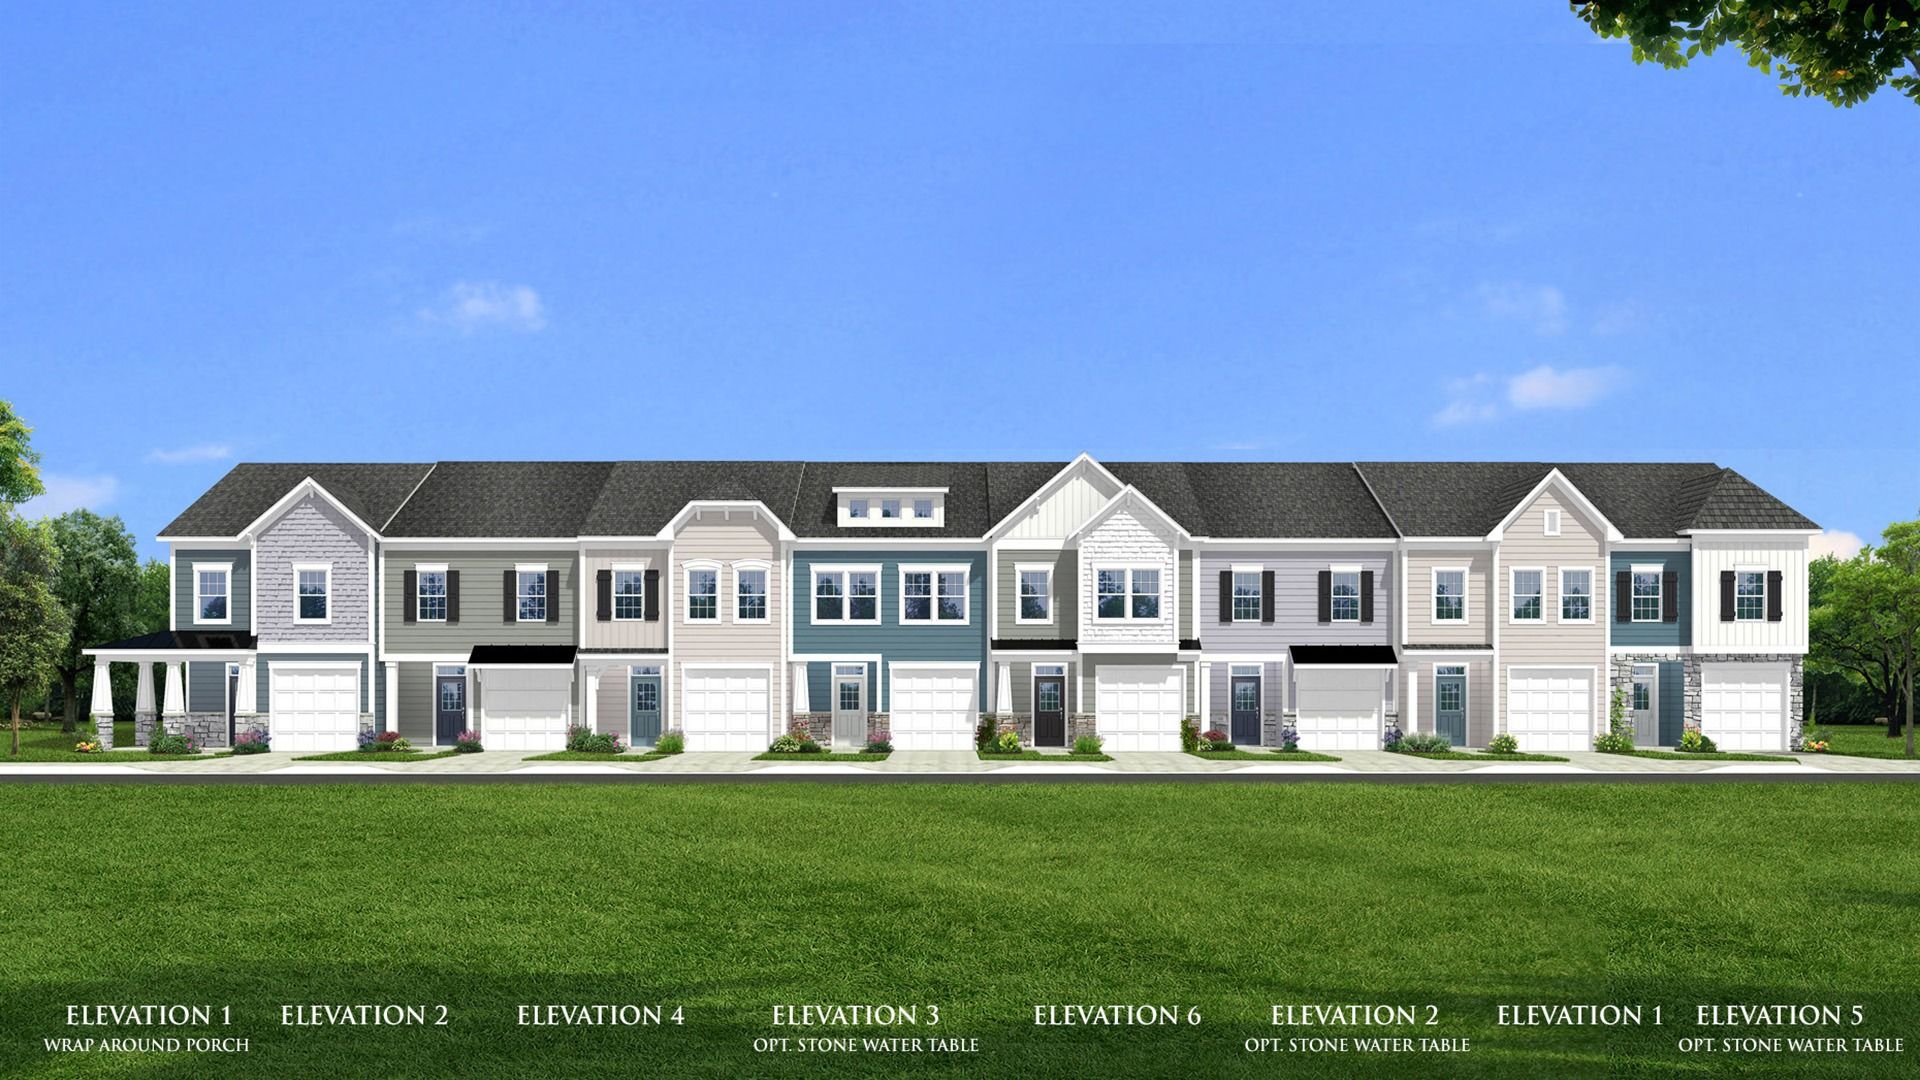 Lynnhaven Elevations 13:Elevation rendering of the DRB Homes Lynnhaven Townhome Design. They are two stories with a one-car garage and driveway.